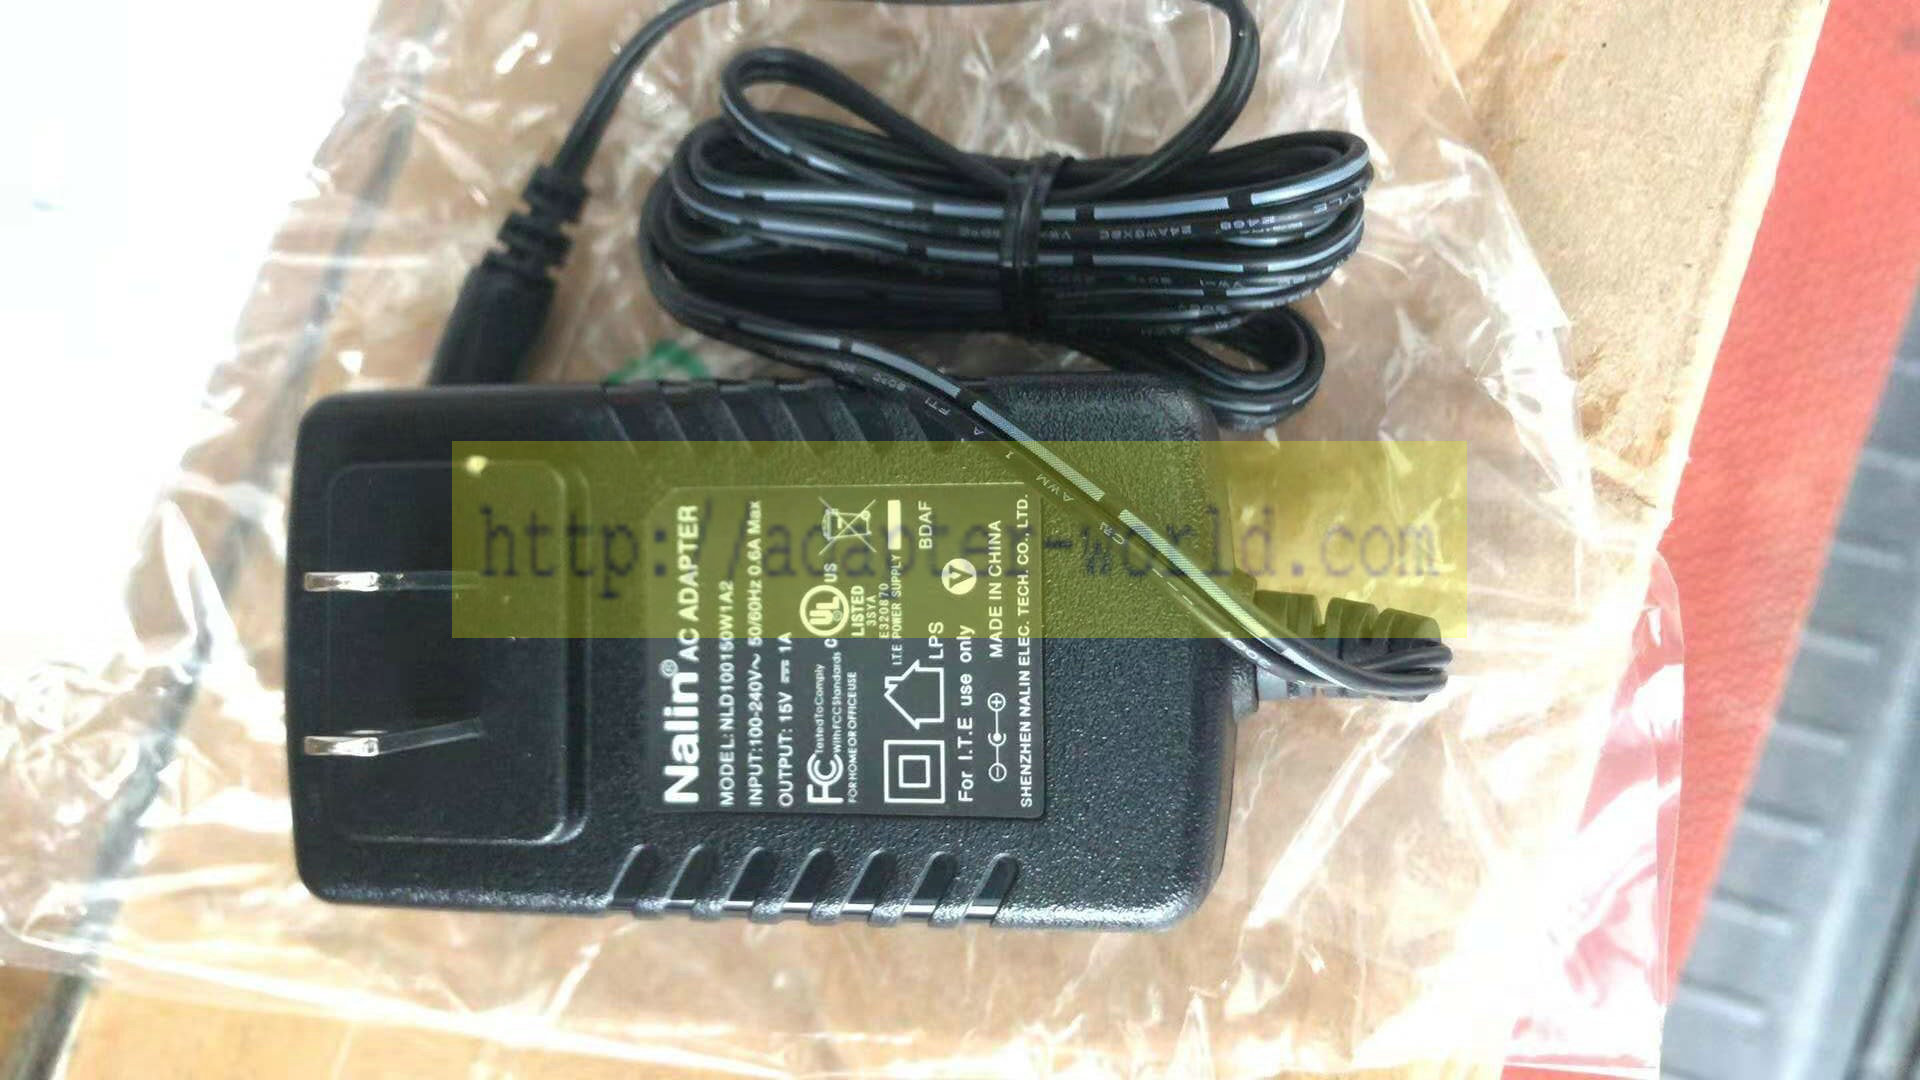 *Brand NEW* Nalin 15V 1A AC DC Adapter NLD100150W1A2 POWER SUPPLY